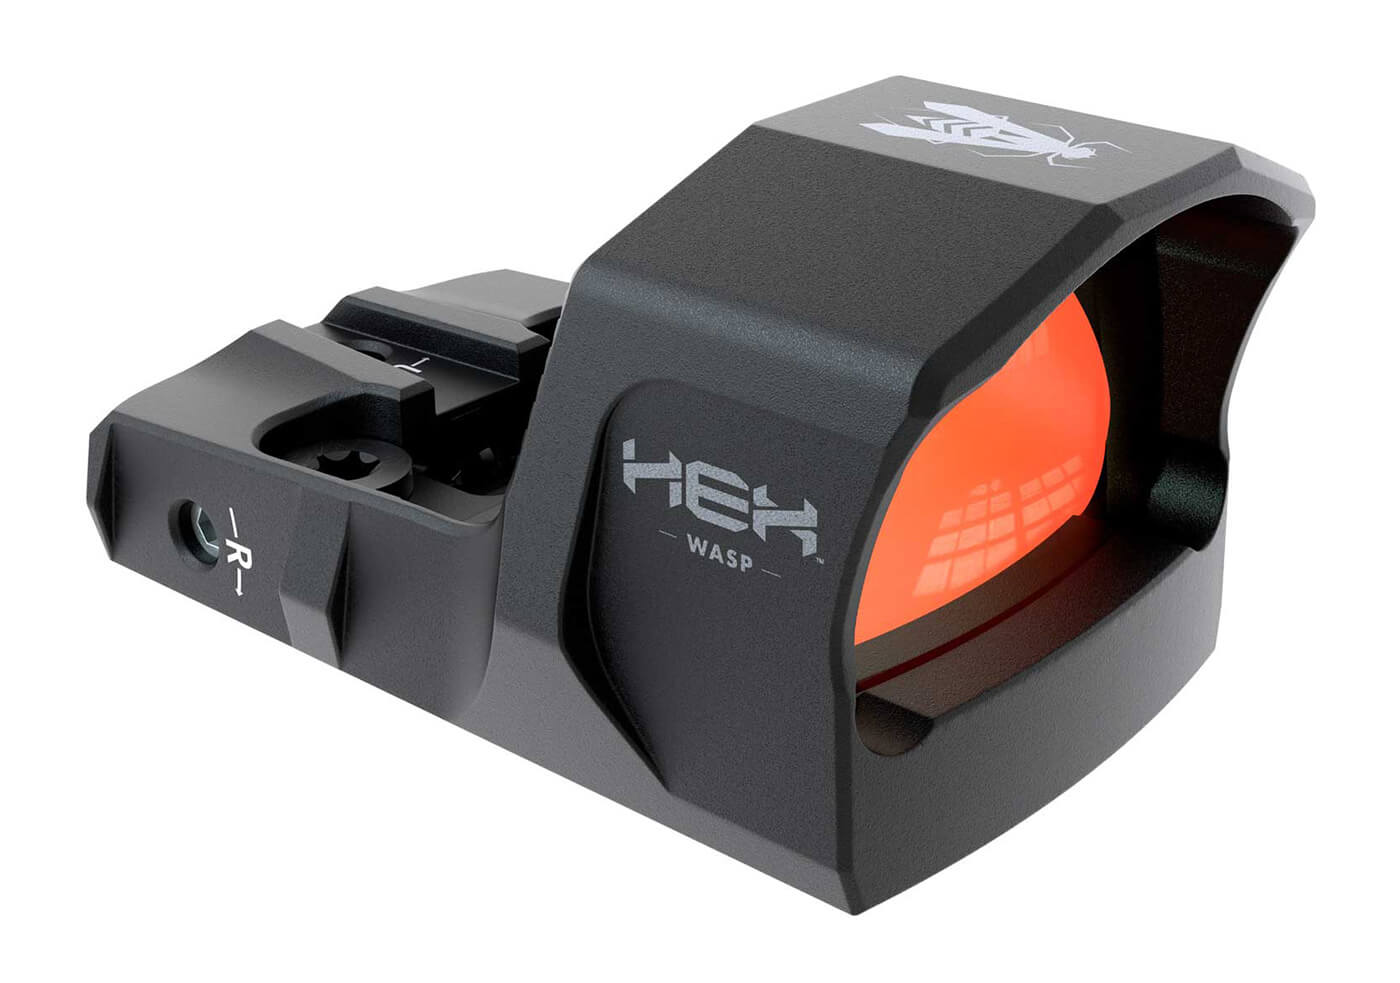 HEX Wasp red dot sight from Springfield Armory